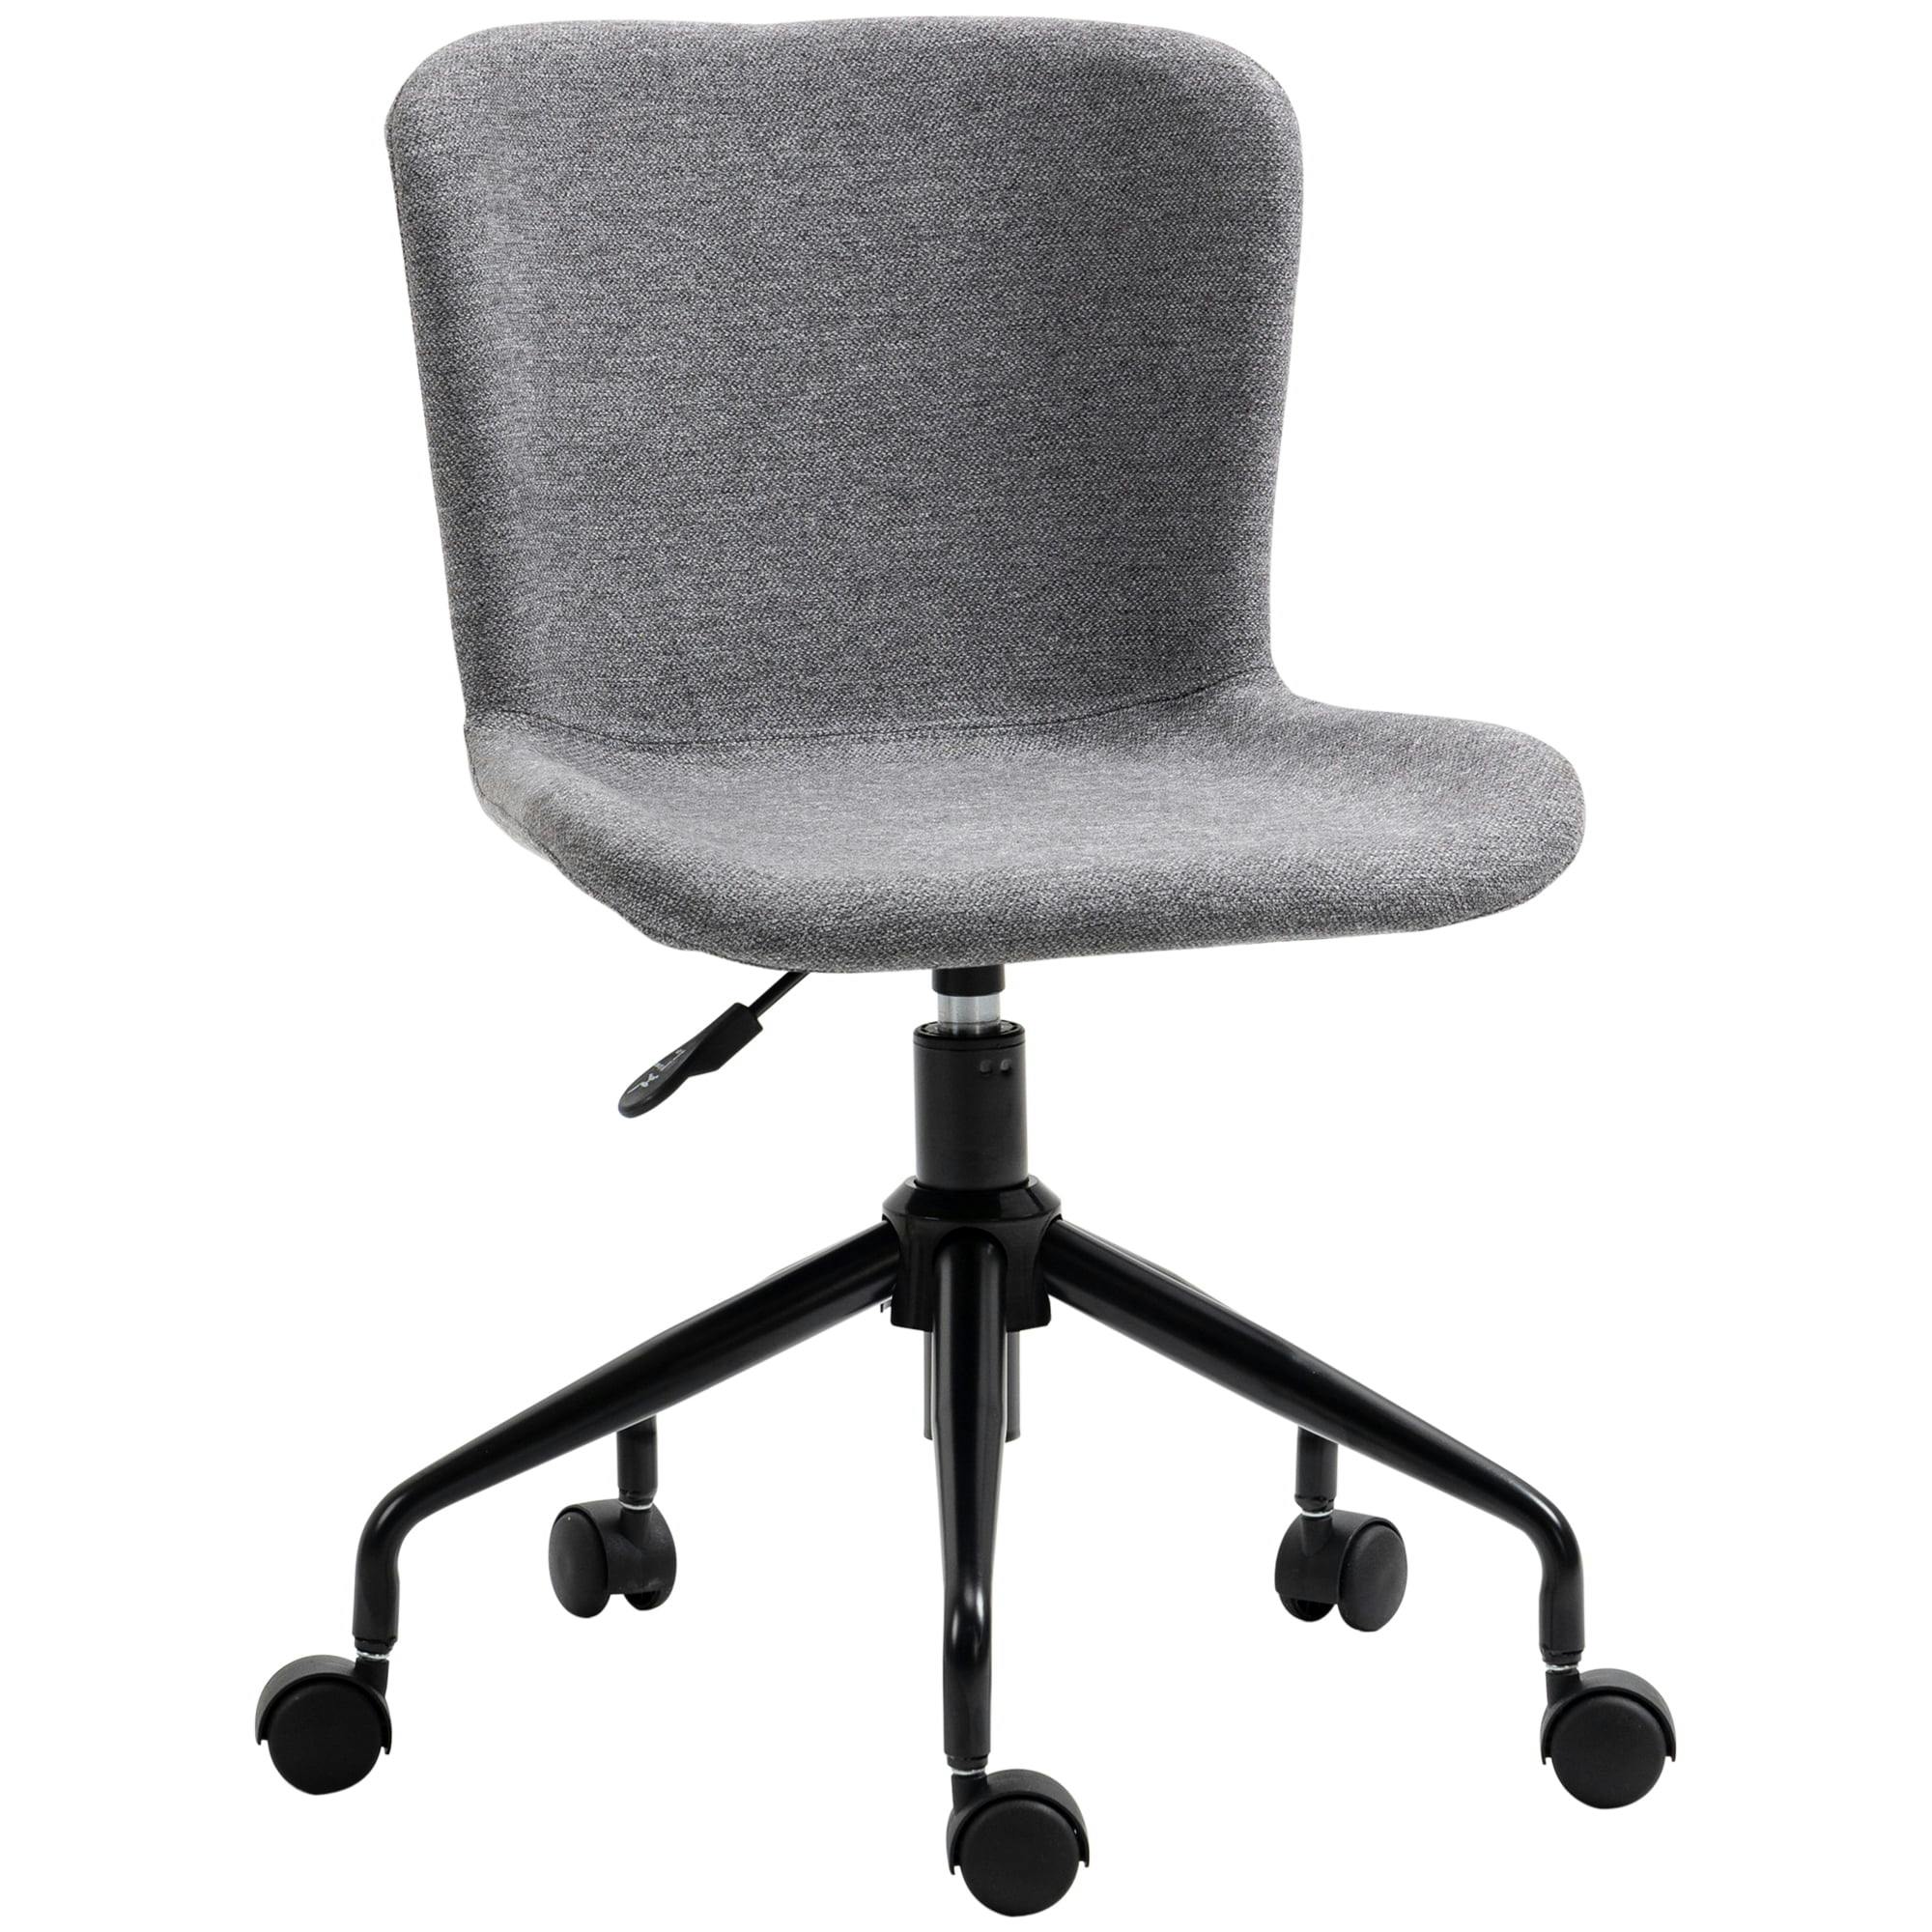 Armless Dark Grey Linen Task Chair for Compact Spaces